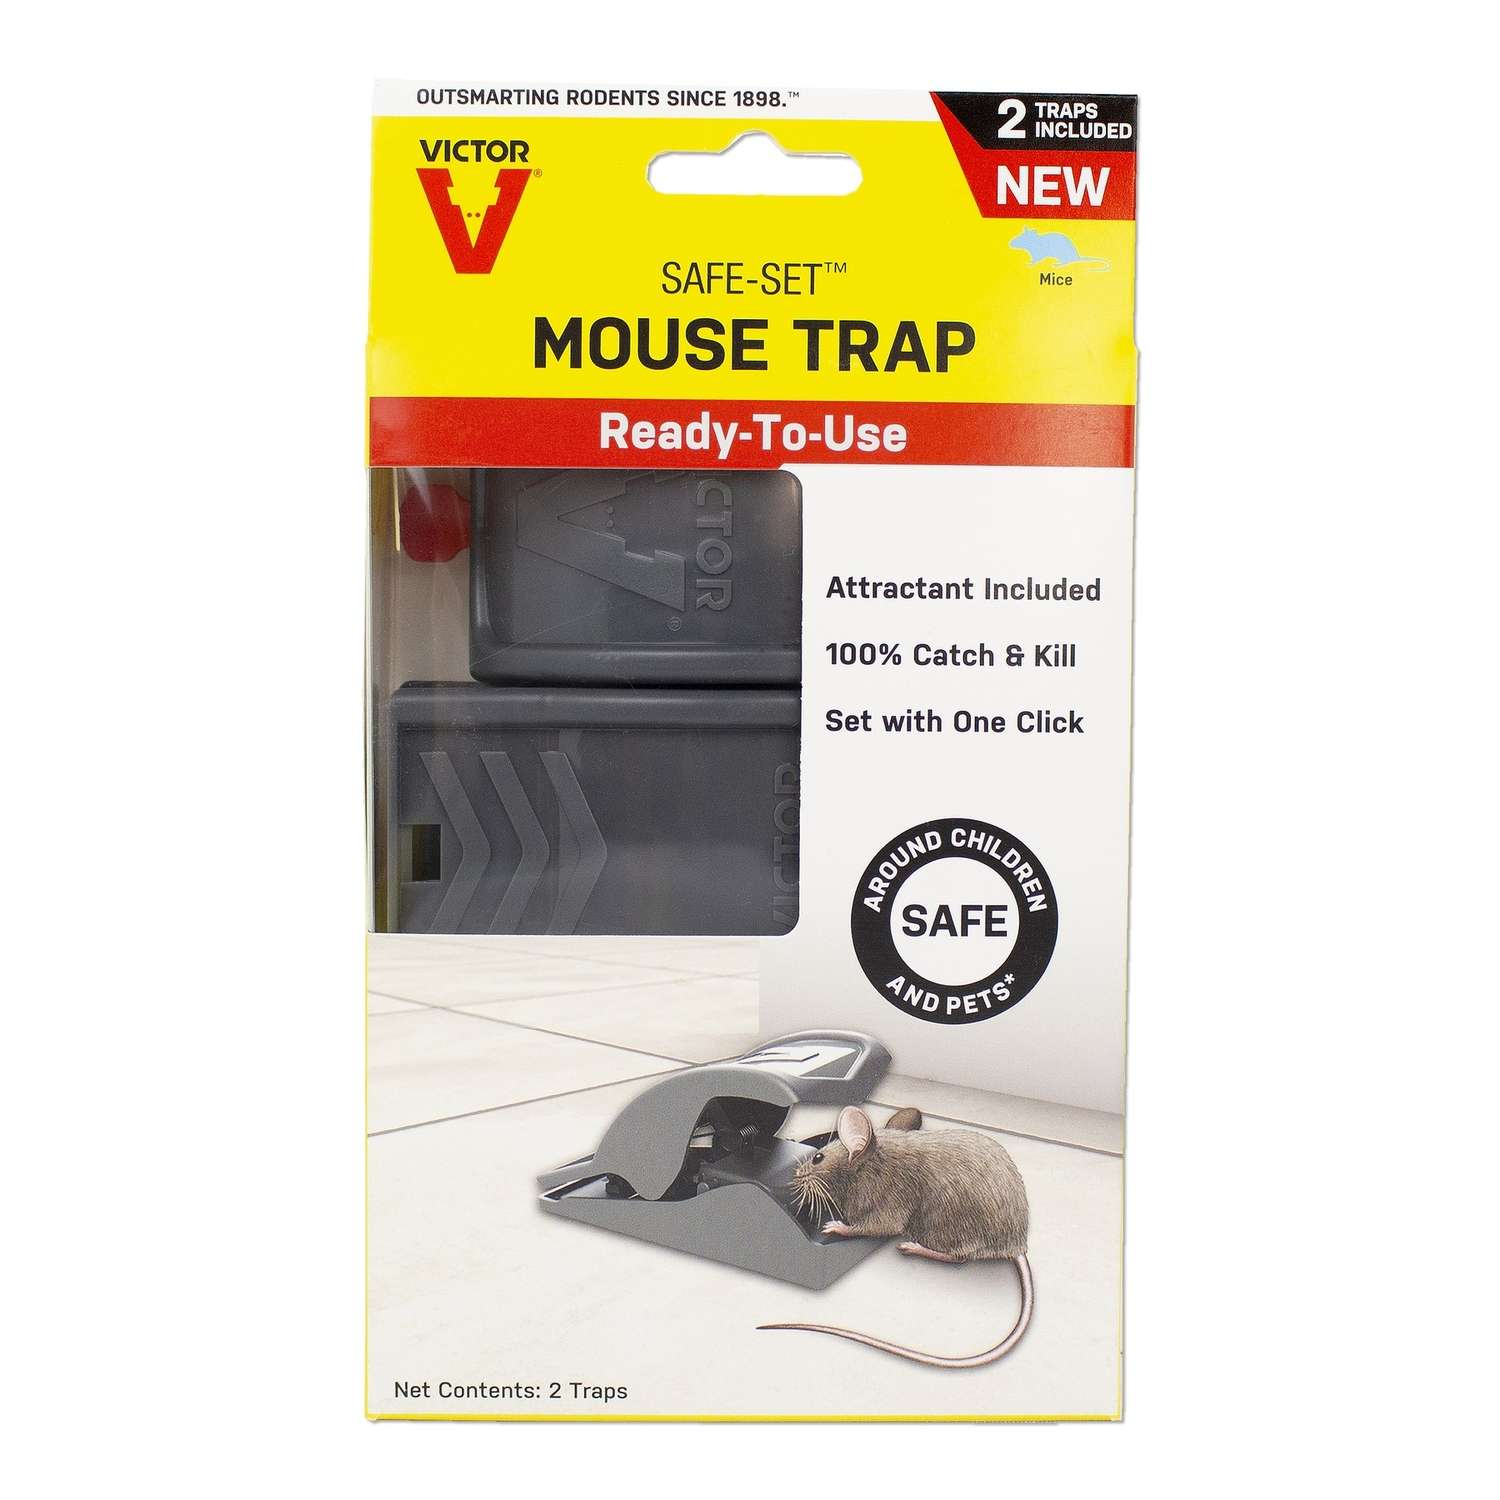 Snap Mouse Rodent Trap Kills Mice Wood Wire Spring Style Pest Control 20 PK NEW